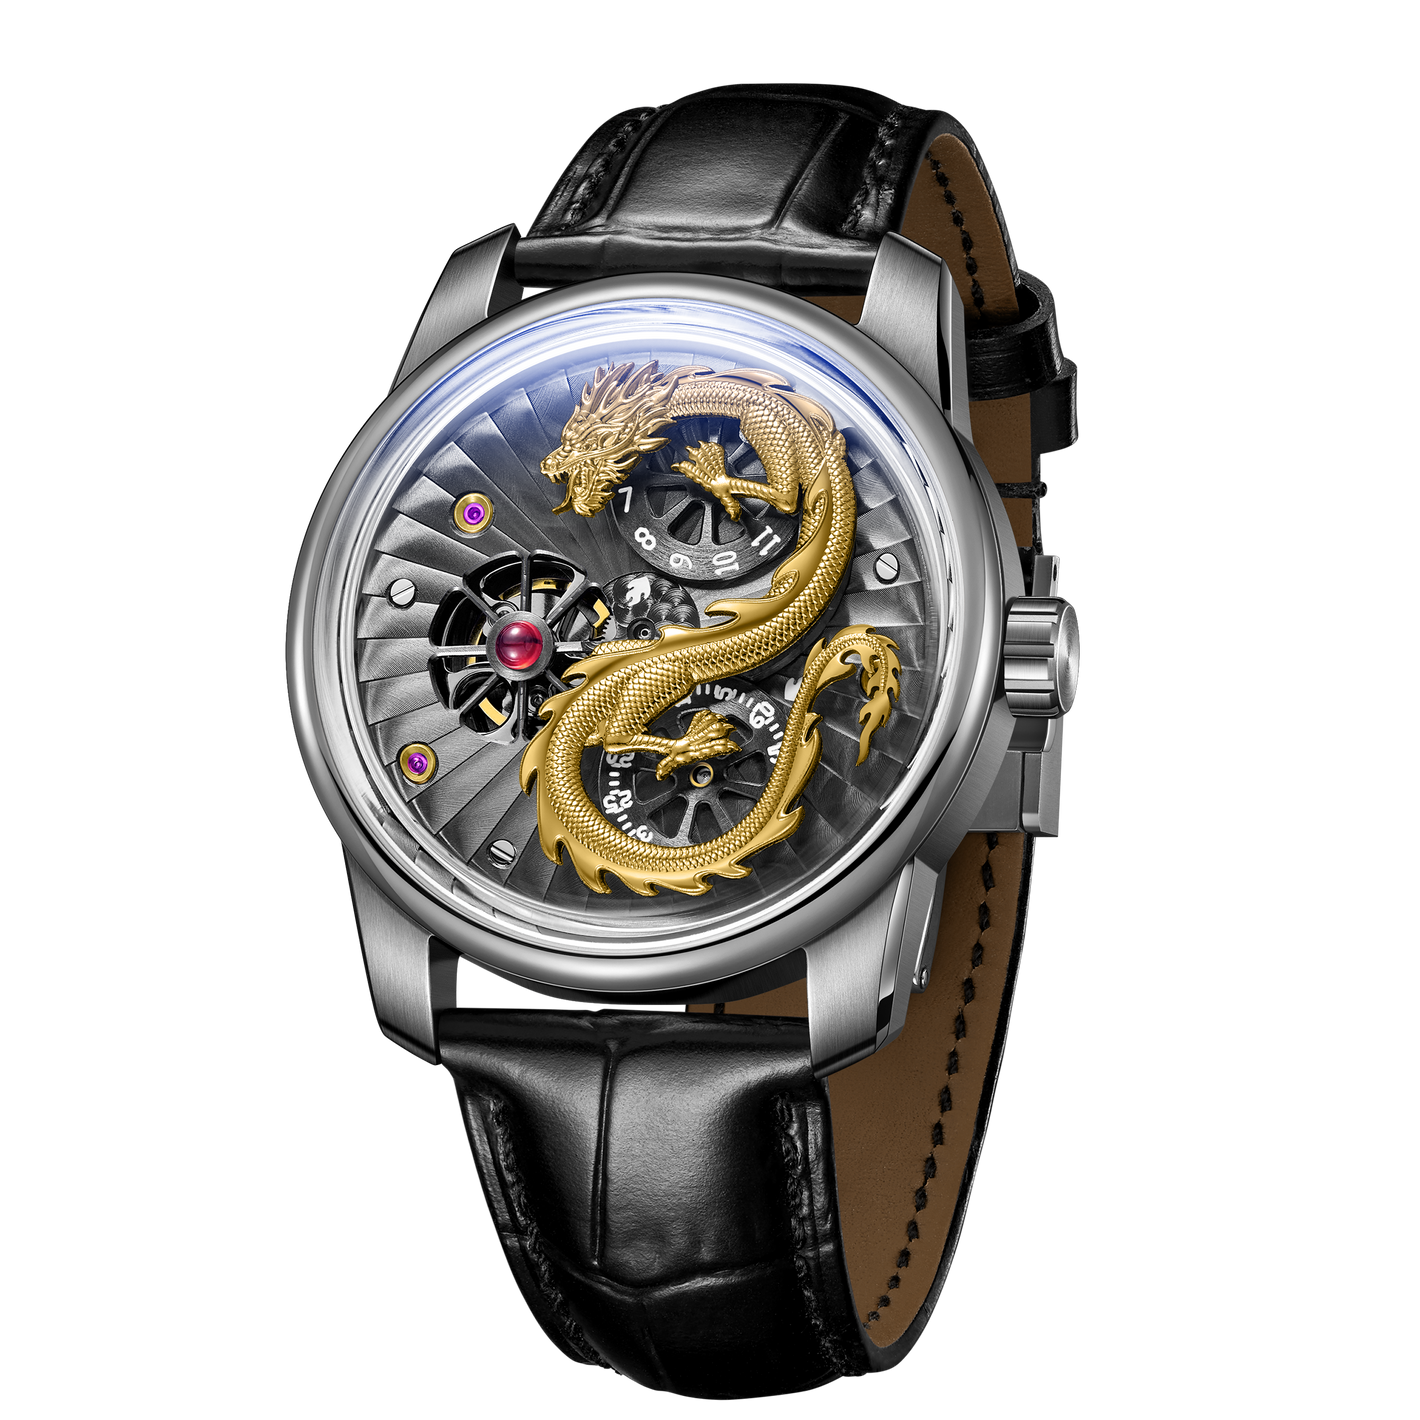 OBLVLO JM Series Gold Dragon Automatic Skeleton Watches | High Quality Luxury Watches